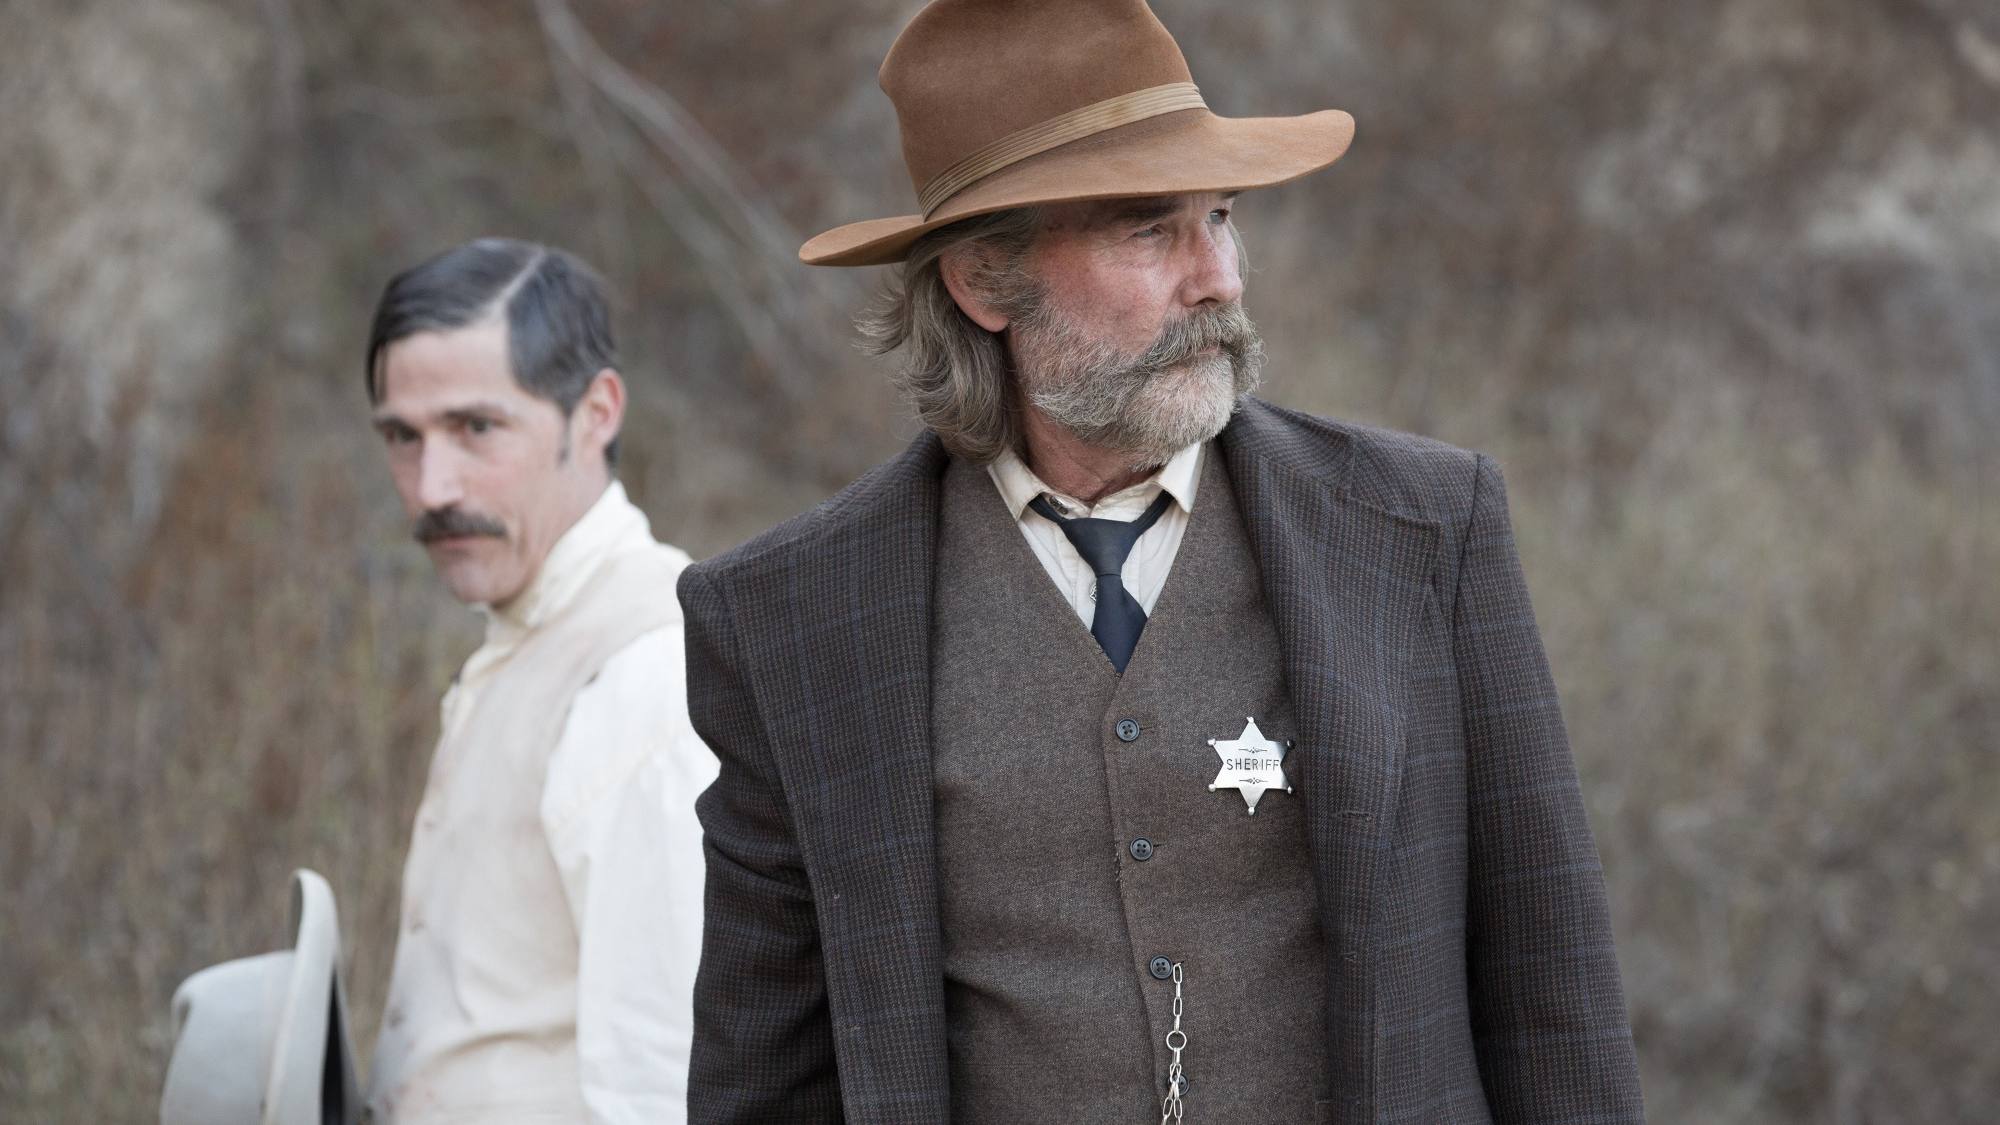 Western horror 'Bone Tomahawk' Matthew Fox as Brooder and Kurt Russell as Sheriff Hunt looking in opposite directions wearing Western clothes. Fox standing behind Russell.